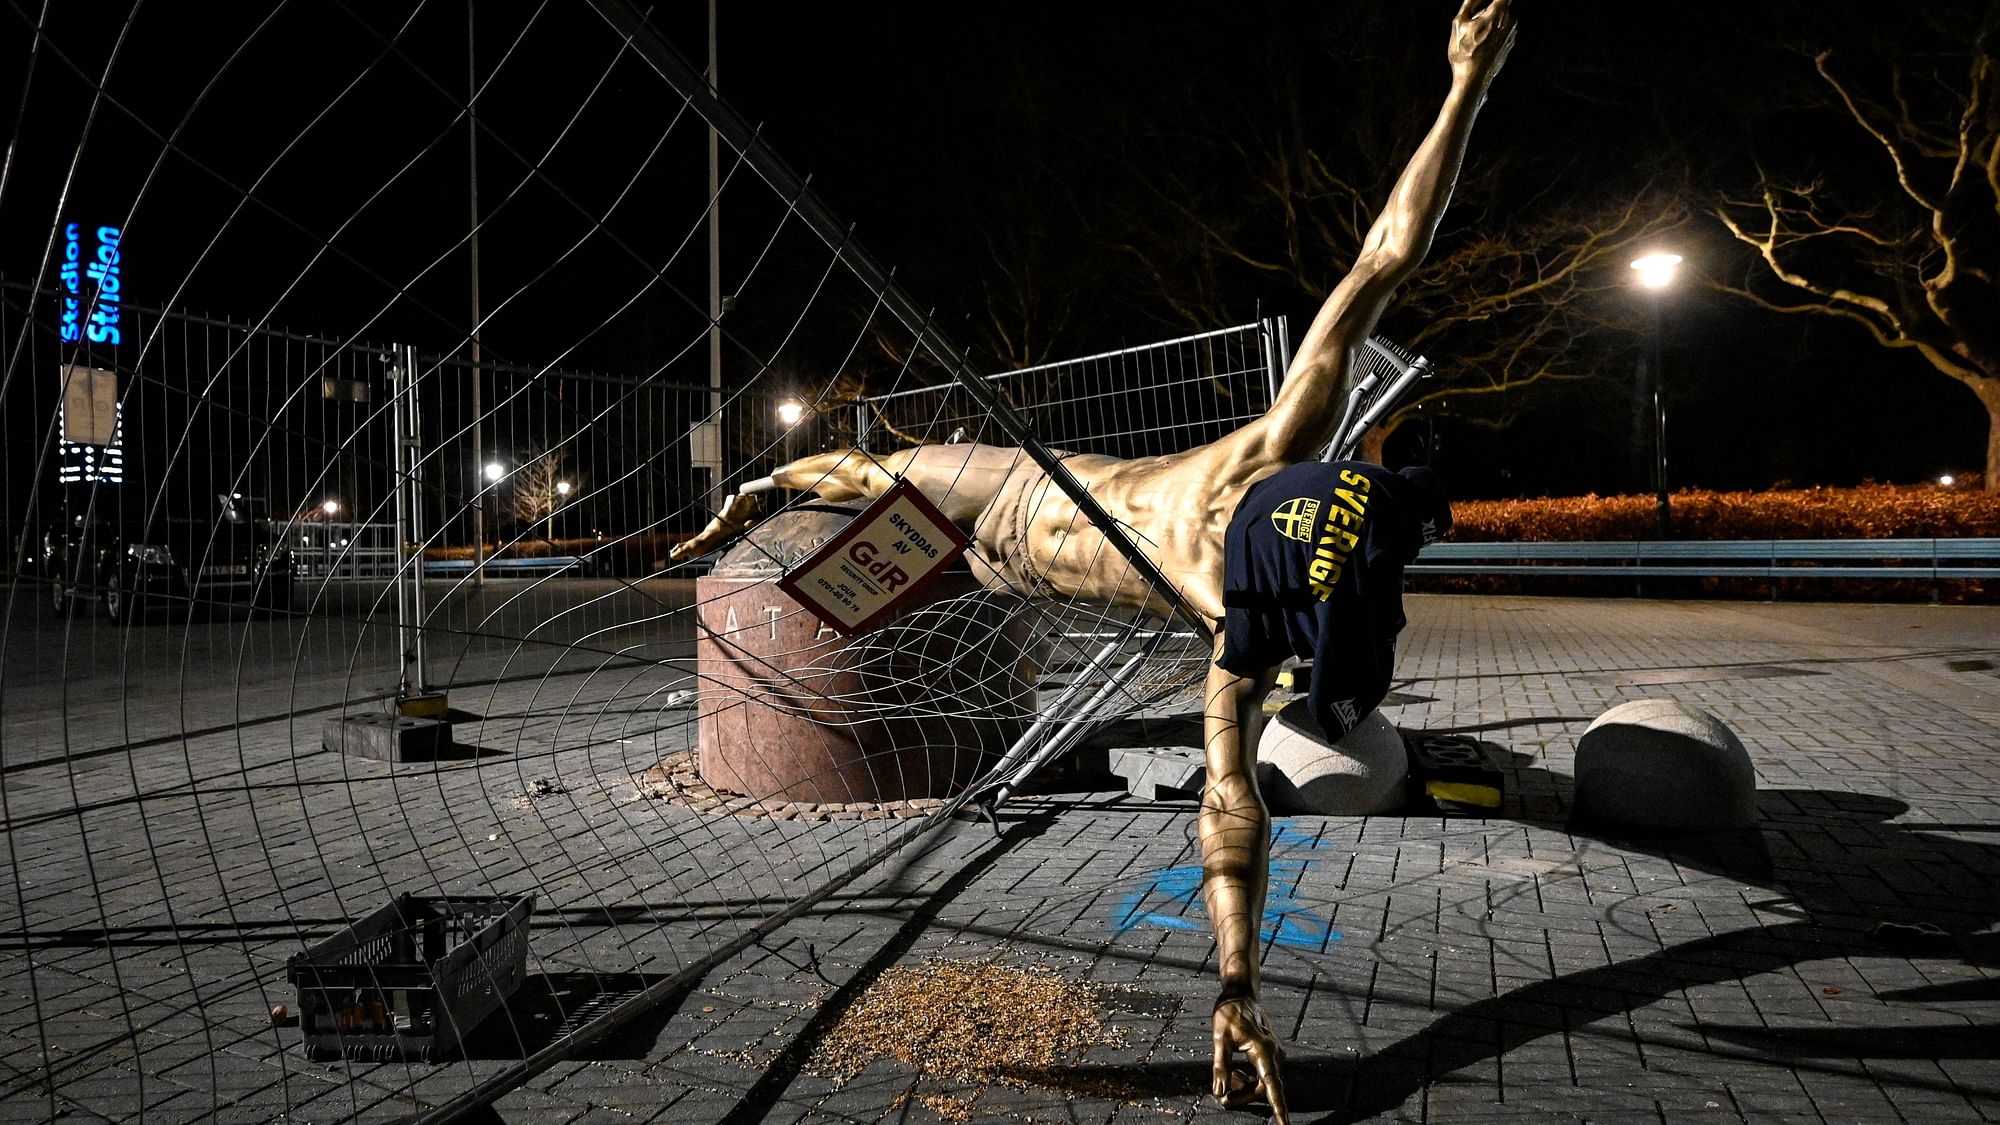 The damaged statue of soccer player Zlatan Ibrahimovic next to Stadion football arena in Malmo, Sweden, Sunday Jan. 5, 2020.